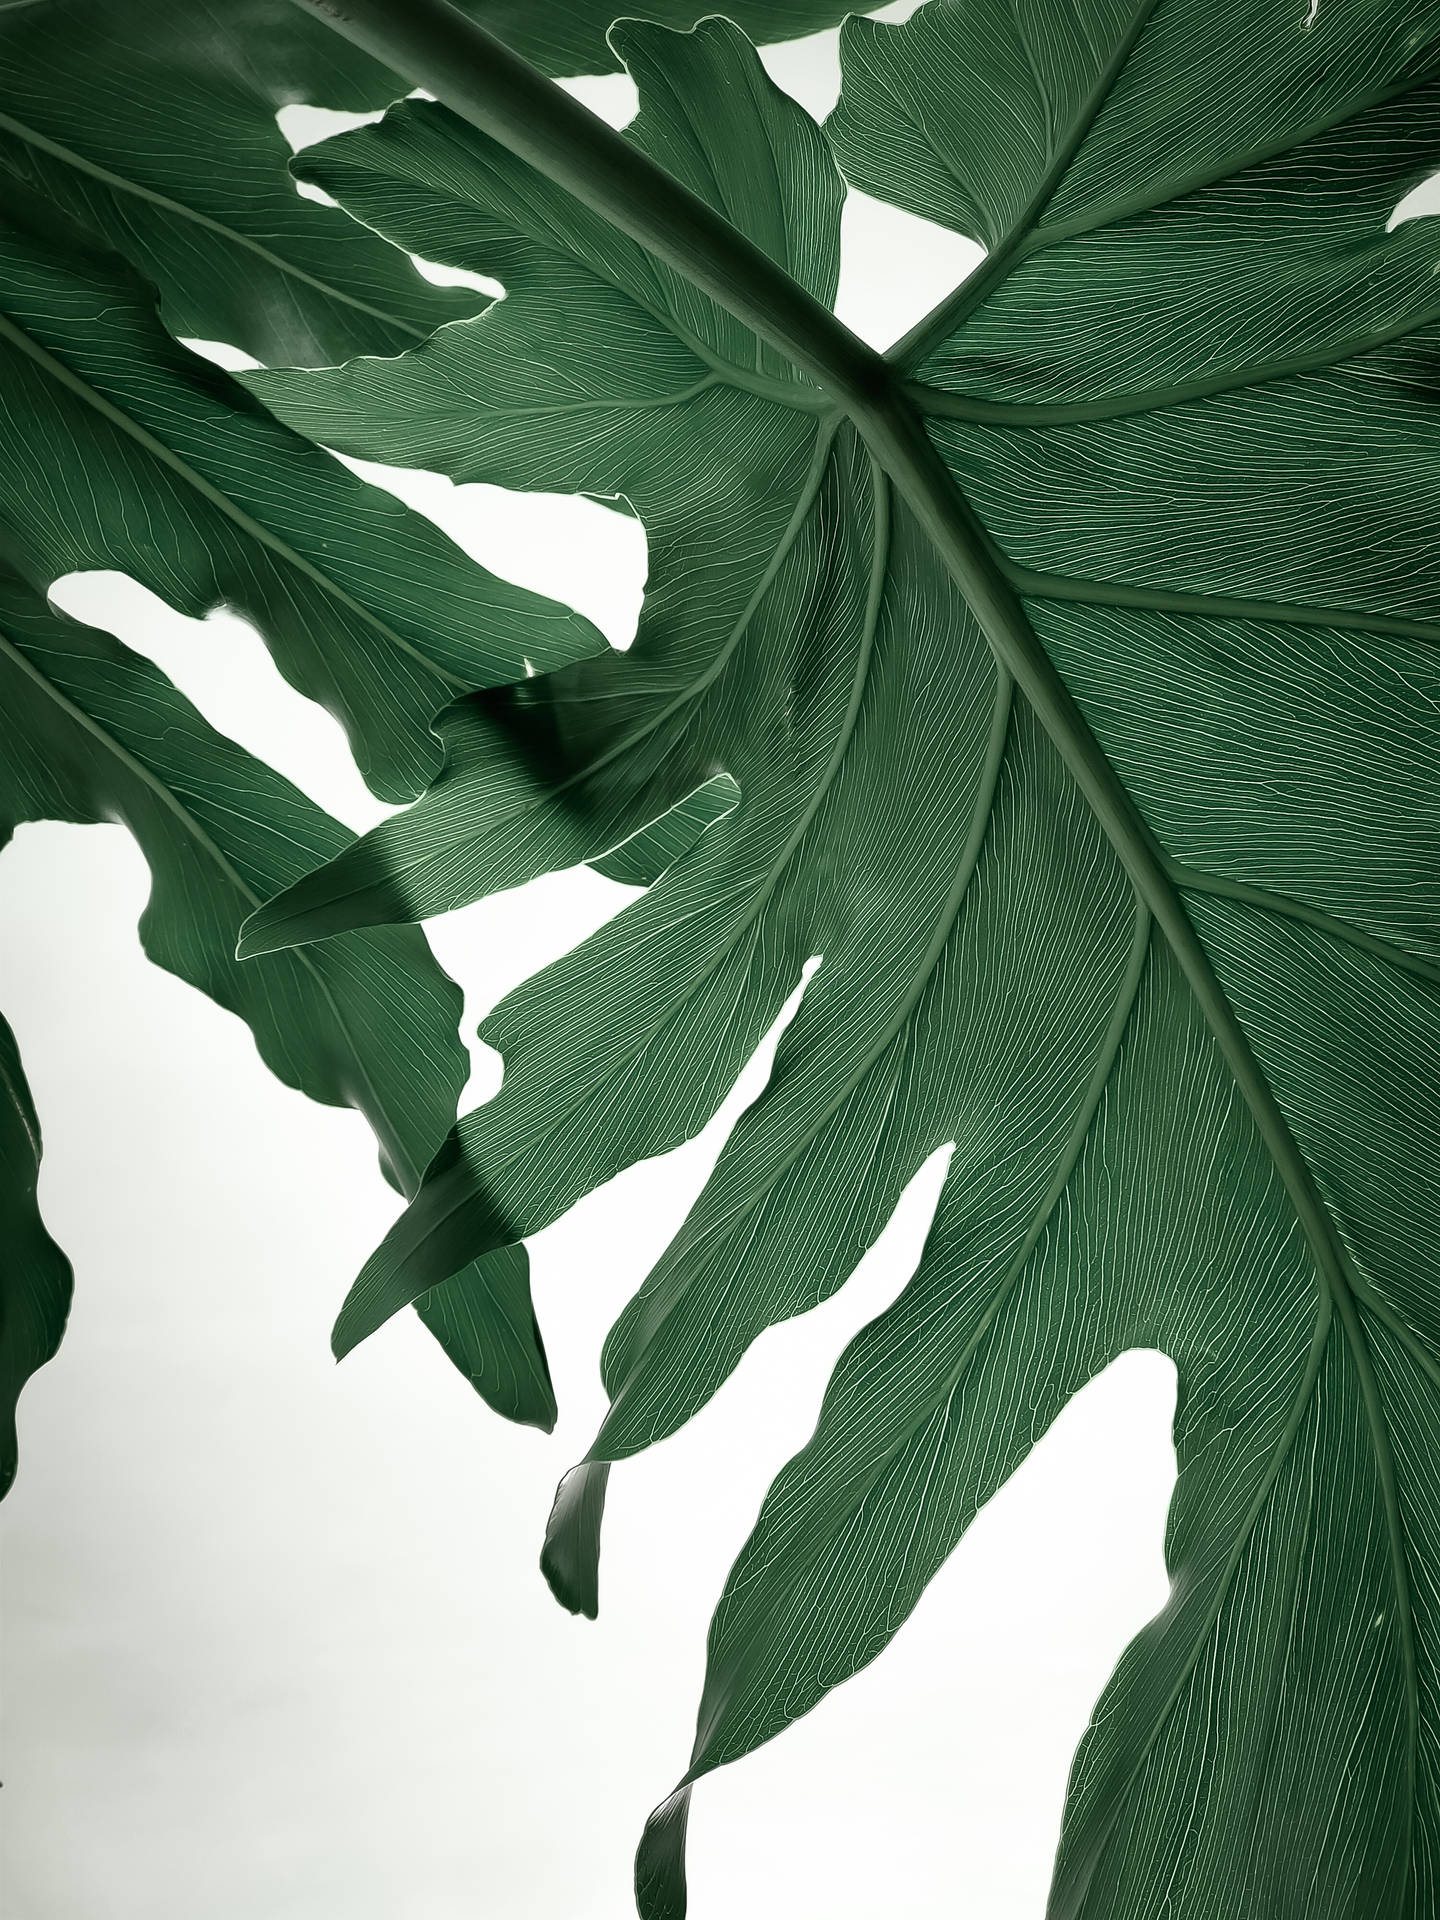 Caption: Exquisite Textured Swiss Cheese Plant Leaves Wallpaper